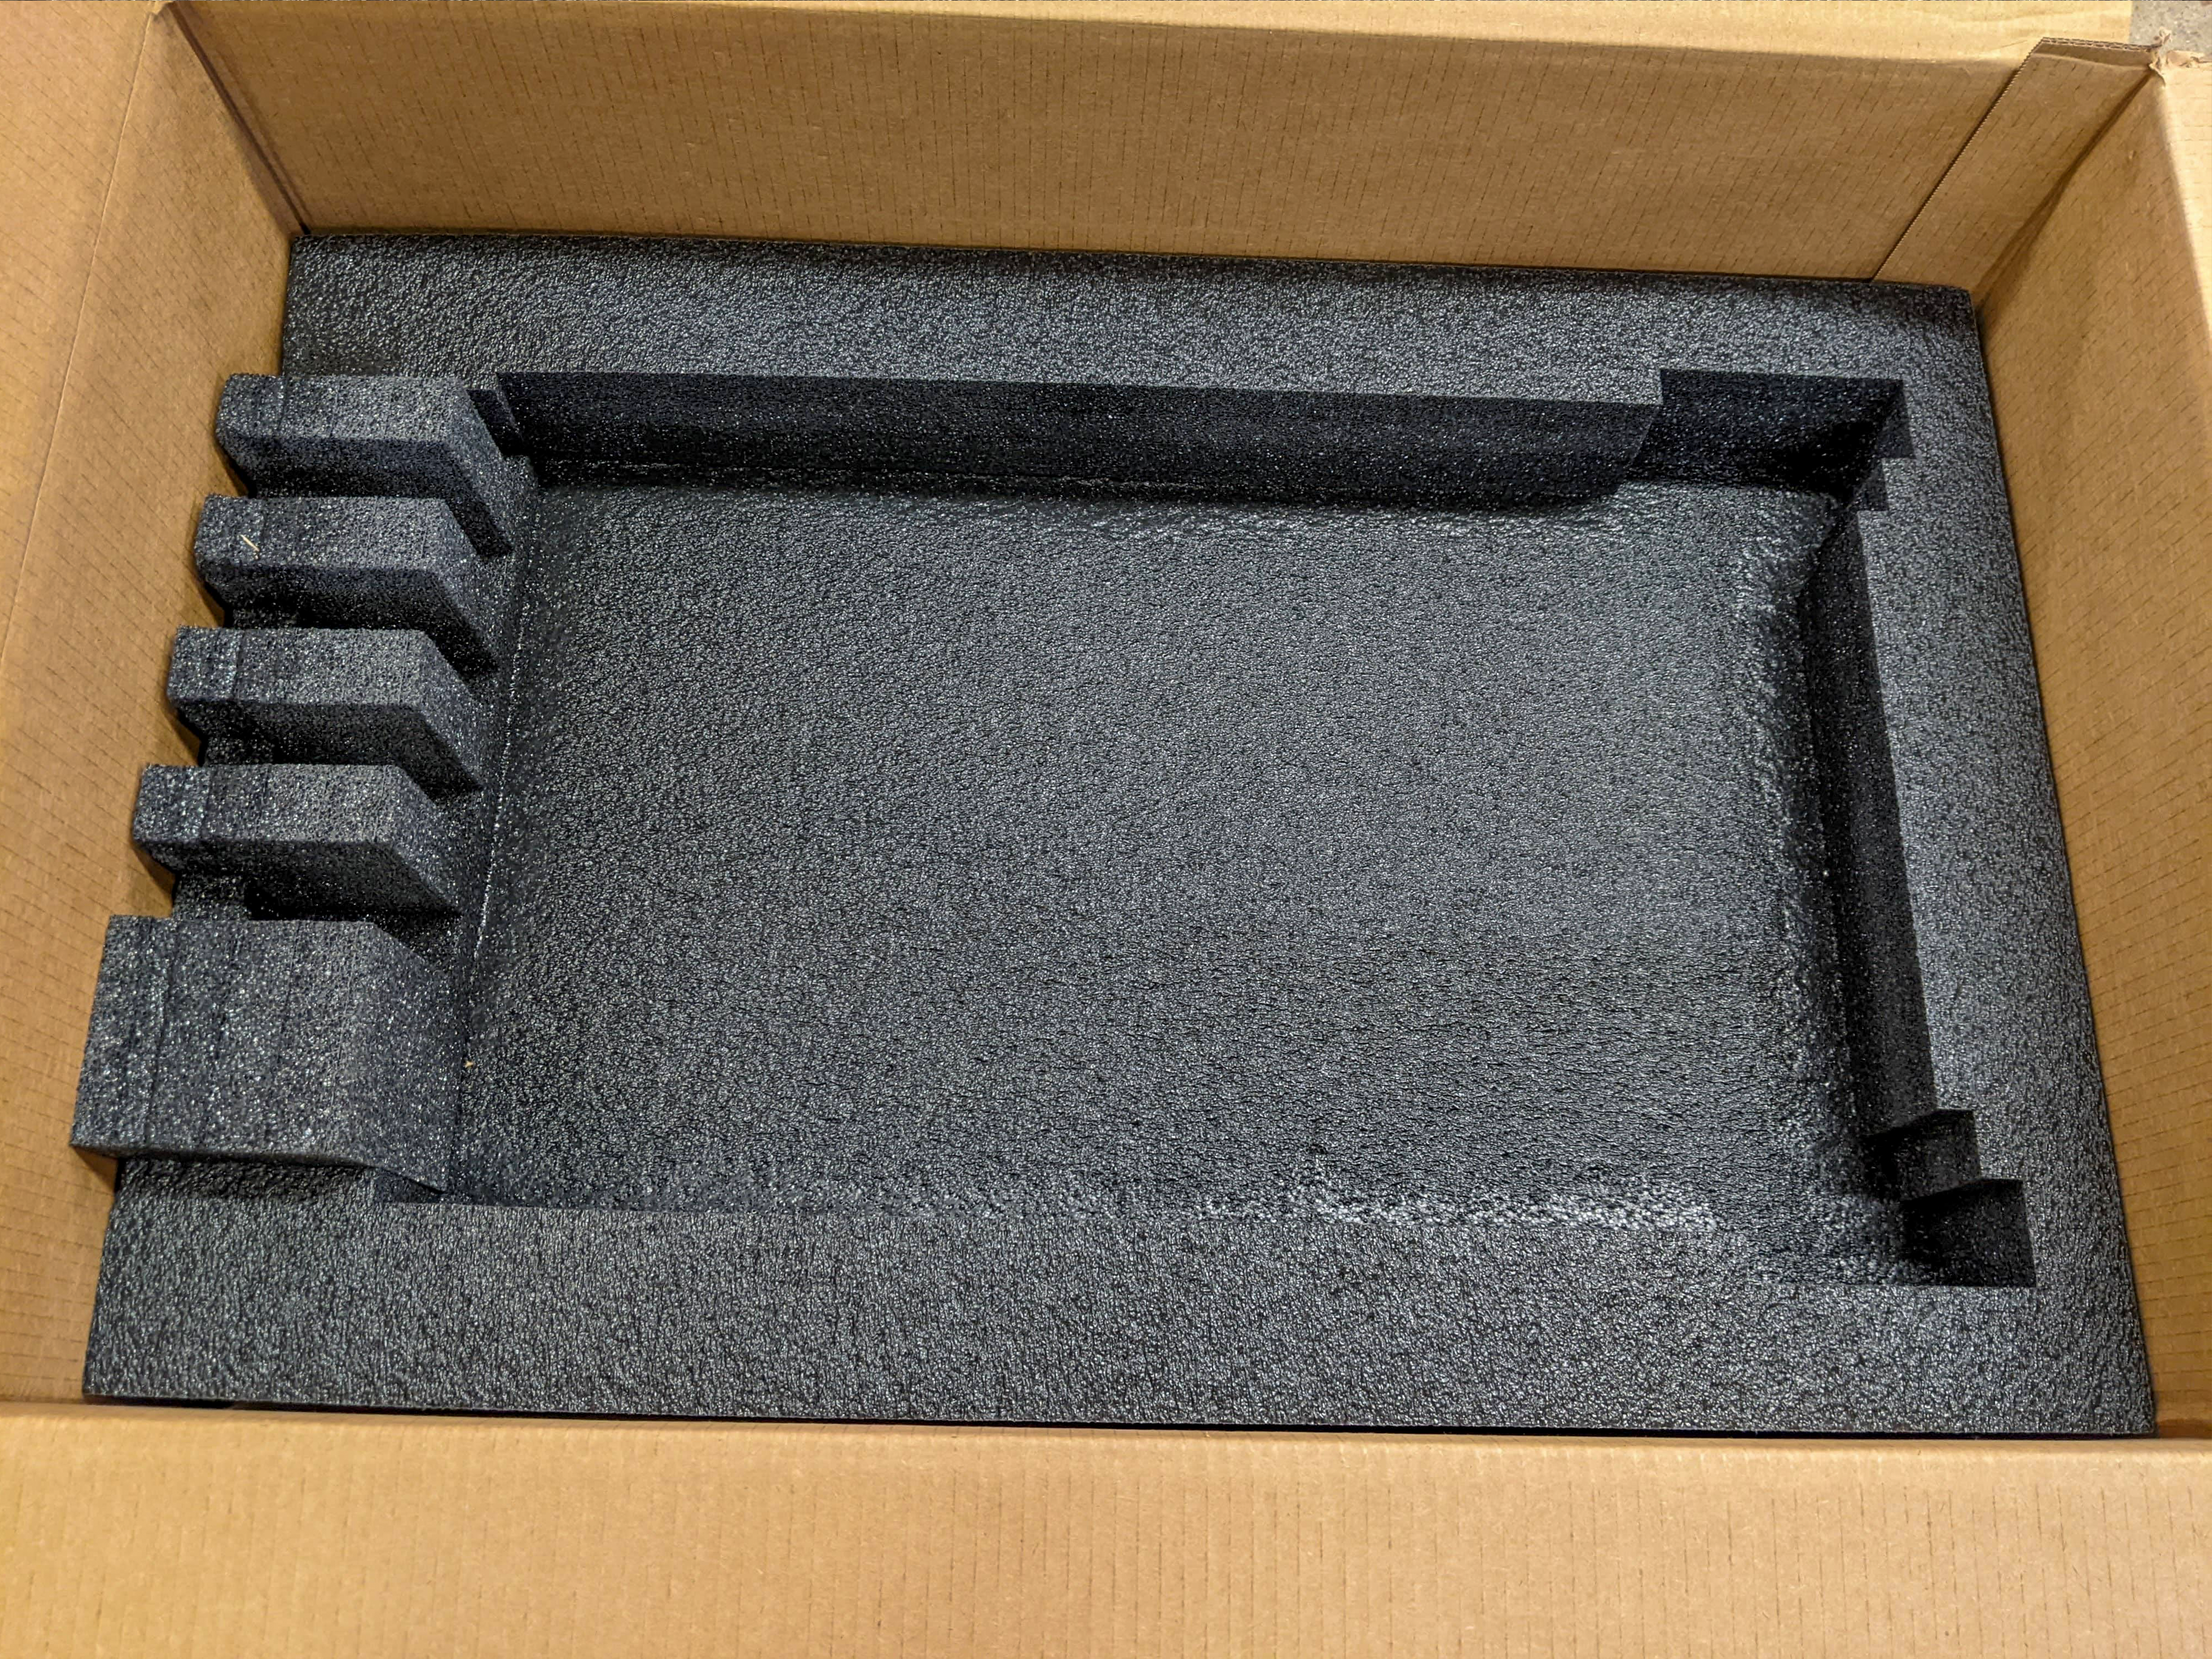 Custom Boxes With Foam Inserts For Valuable Equipment